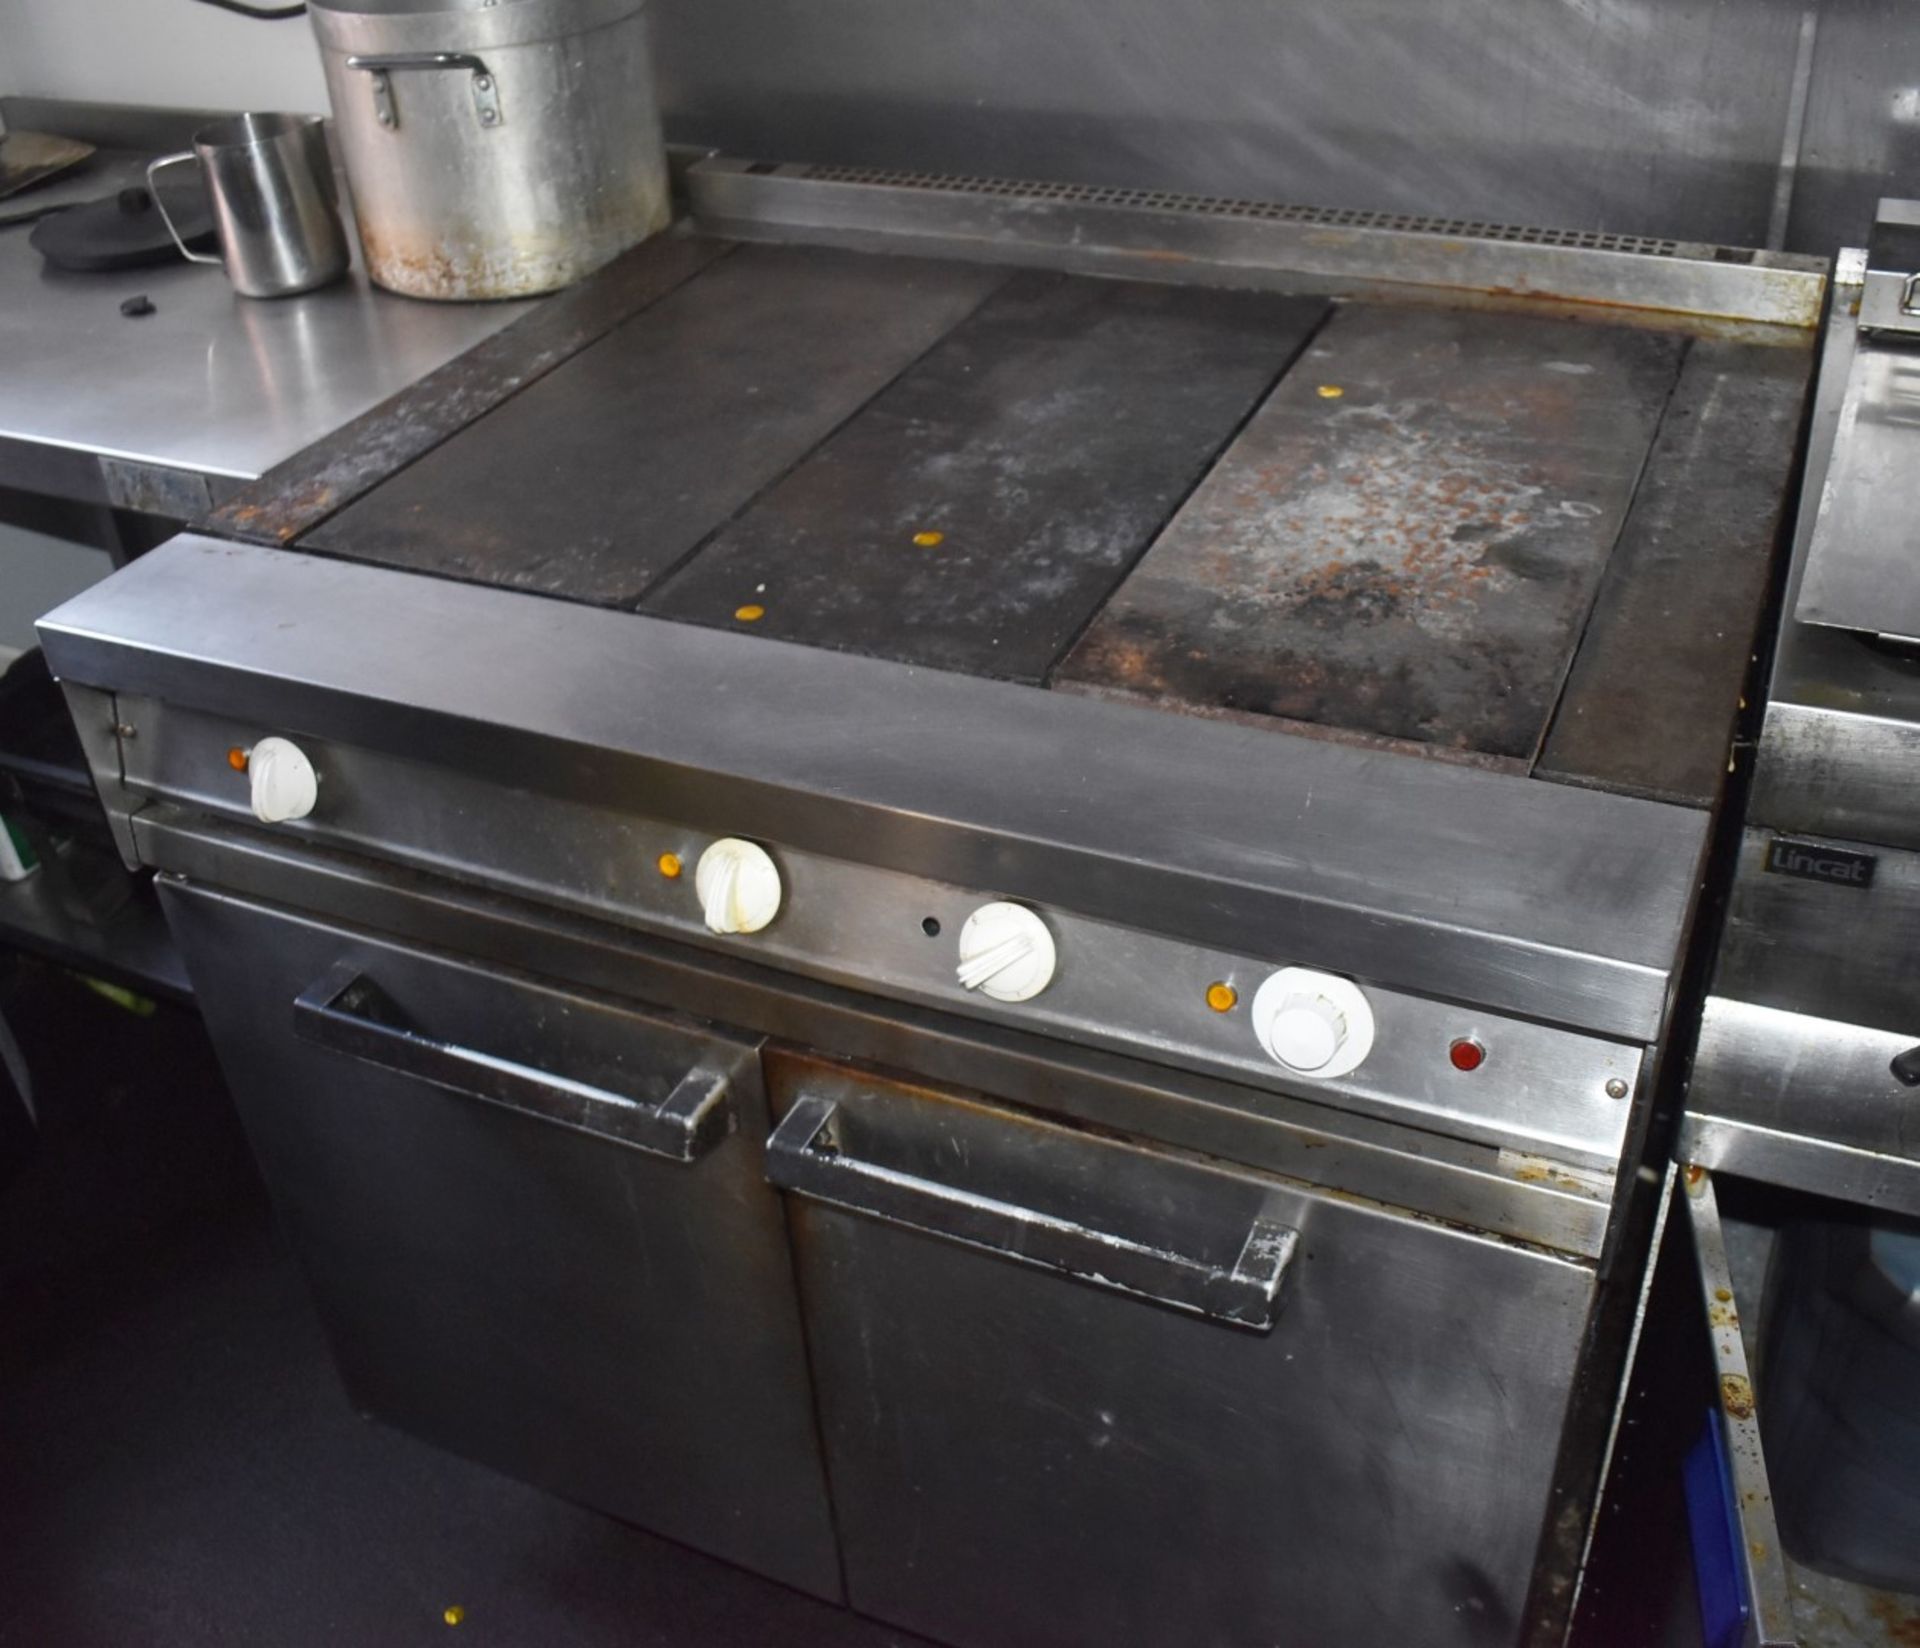 1 x Solid Top Commercial Range Cooker Oven - 90cm Wide - 3 Phase Power - CL586 - Image 2 of 3